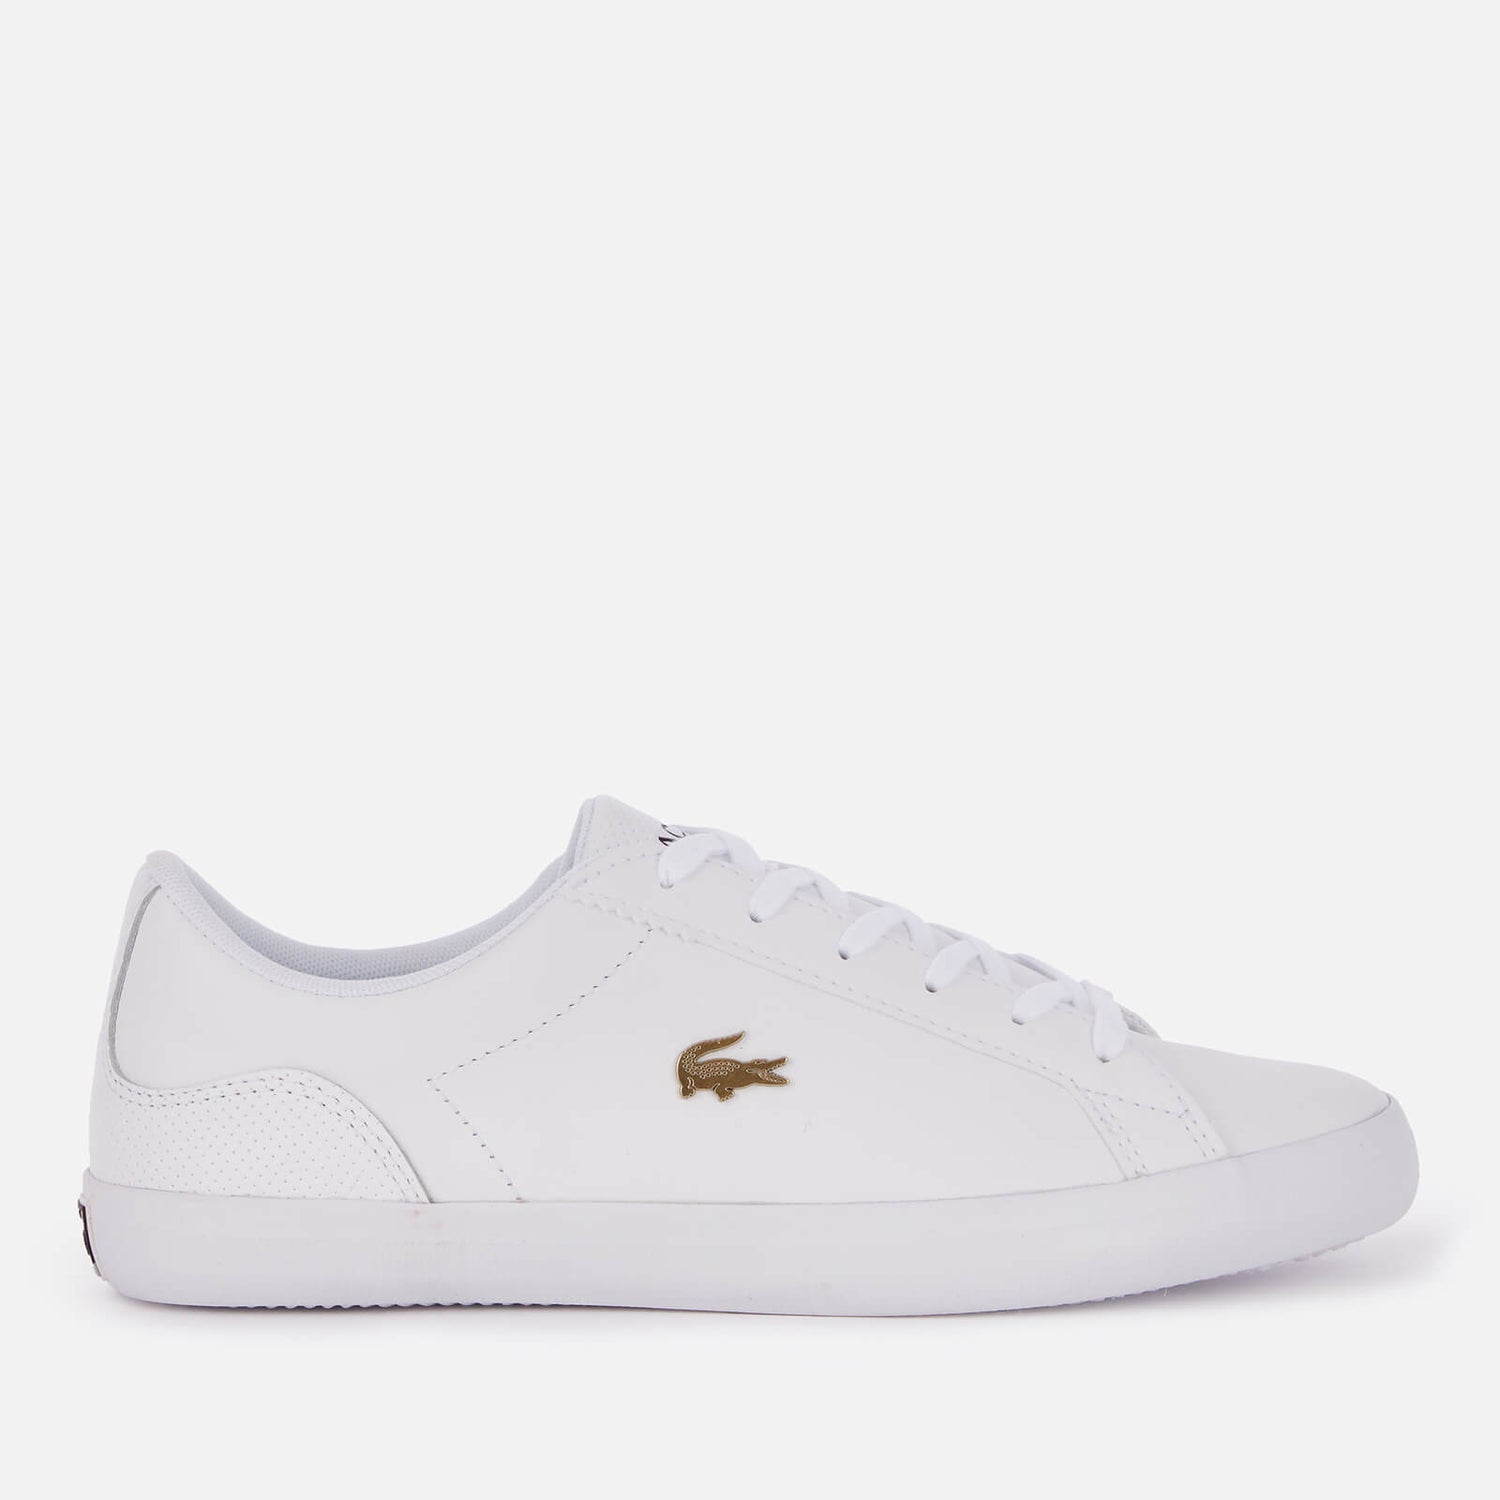 Lacoste Women's Lerond 0120 2 Leather Low Top Trainers - White/White ...